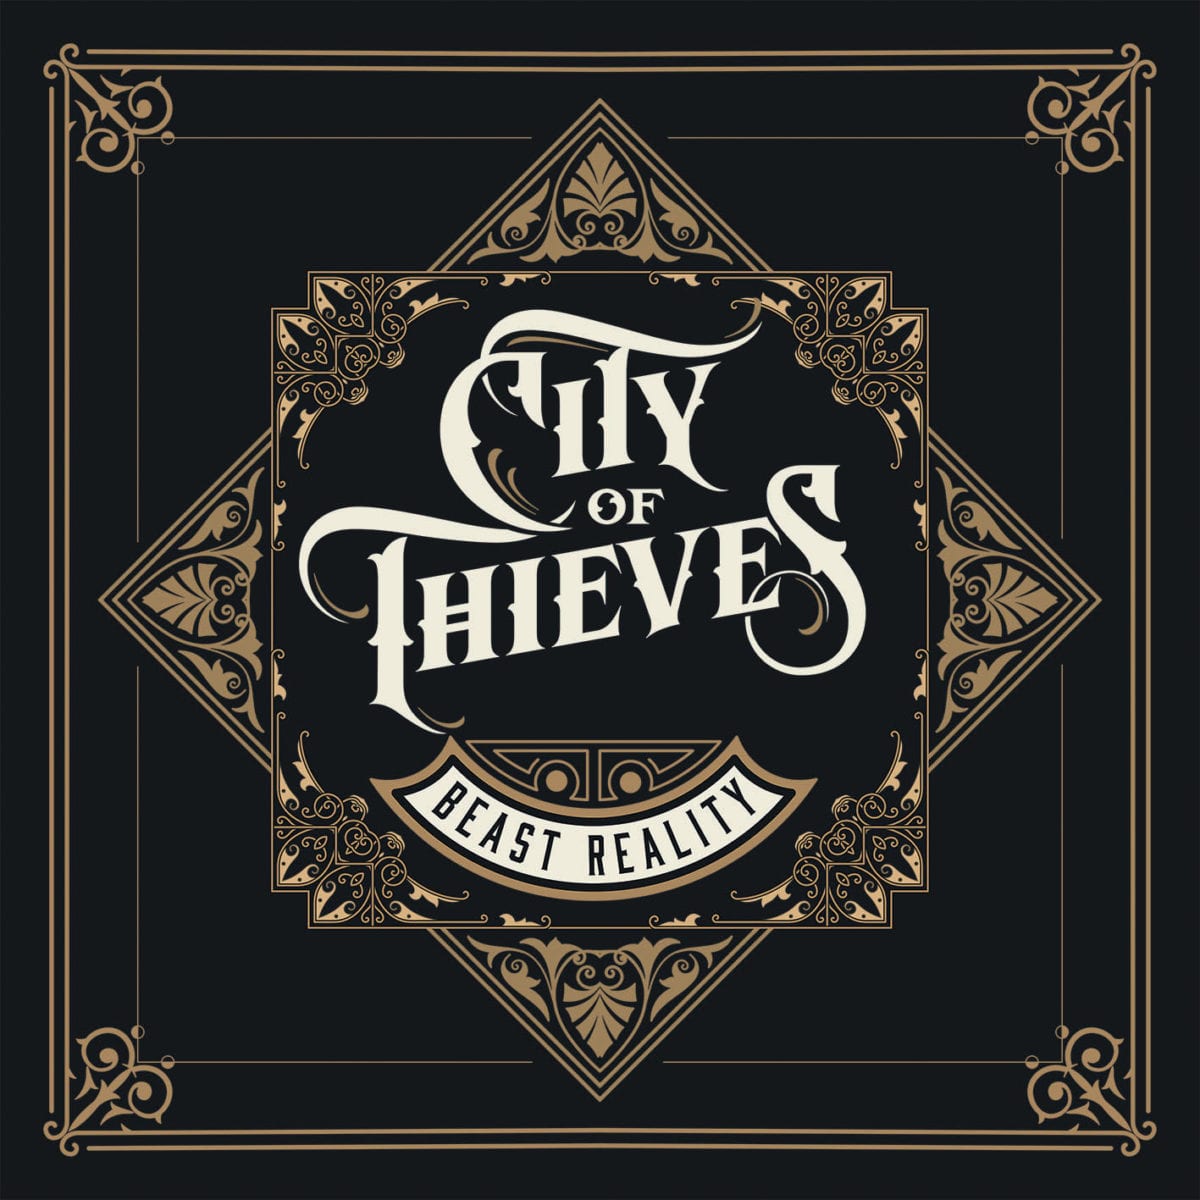 CITY OF THIEVES ‘Beast Reality’